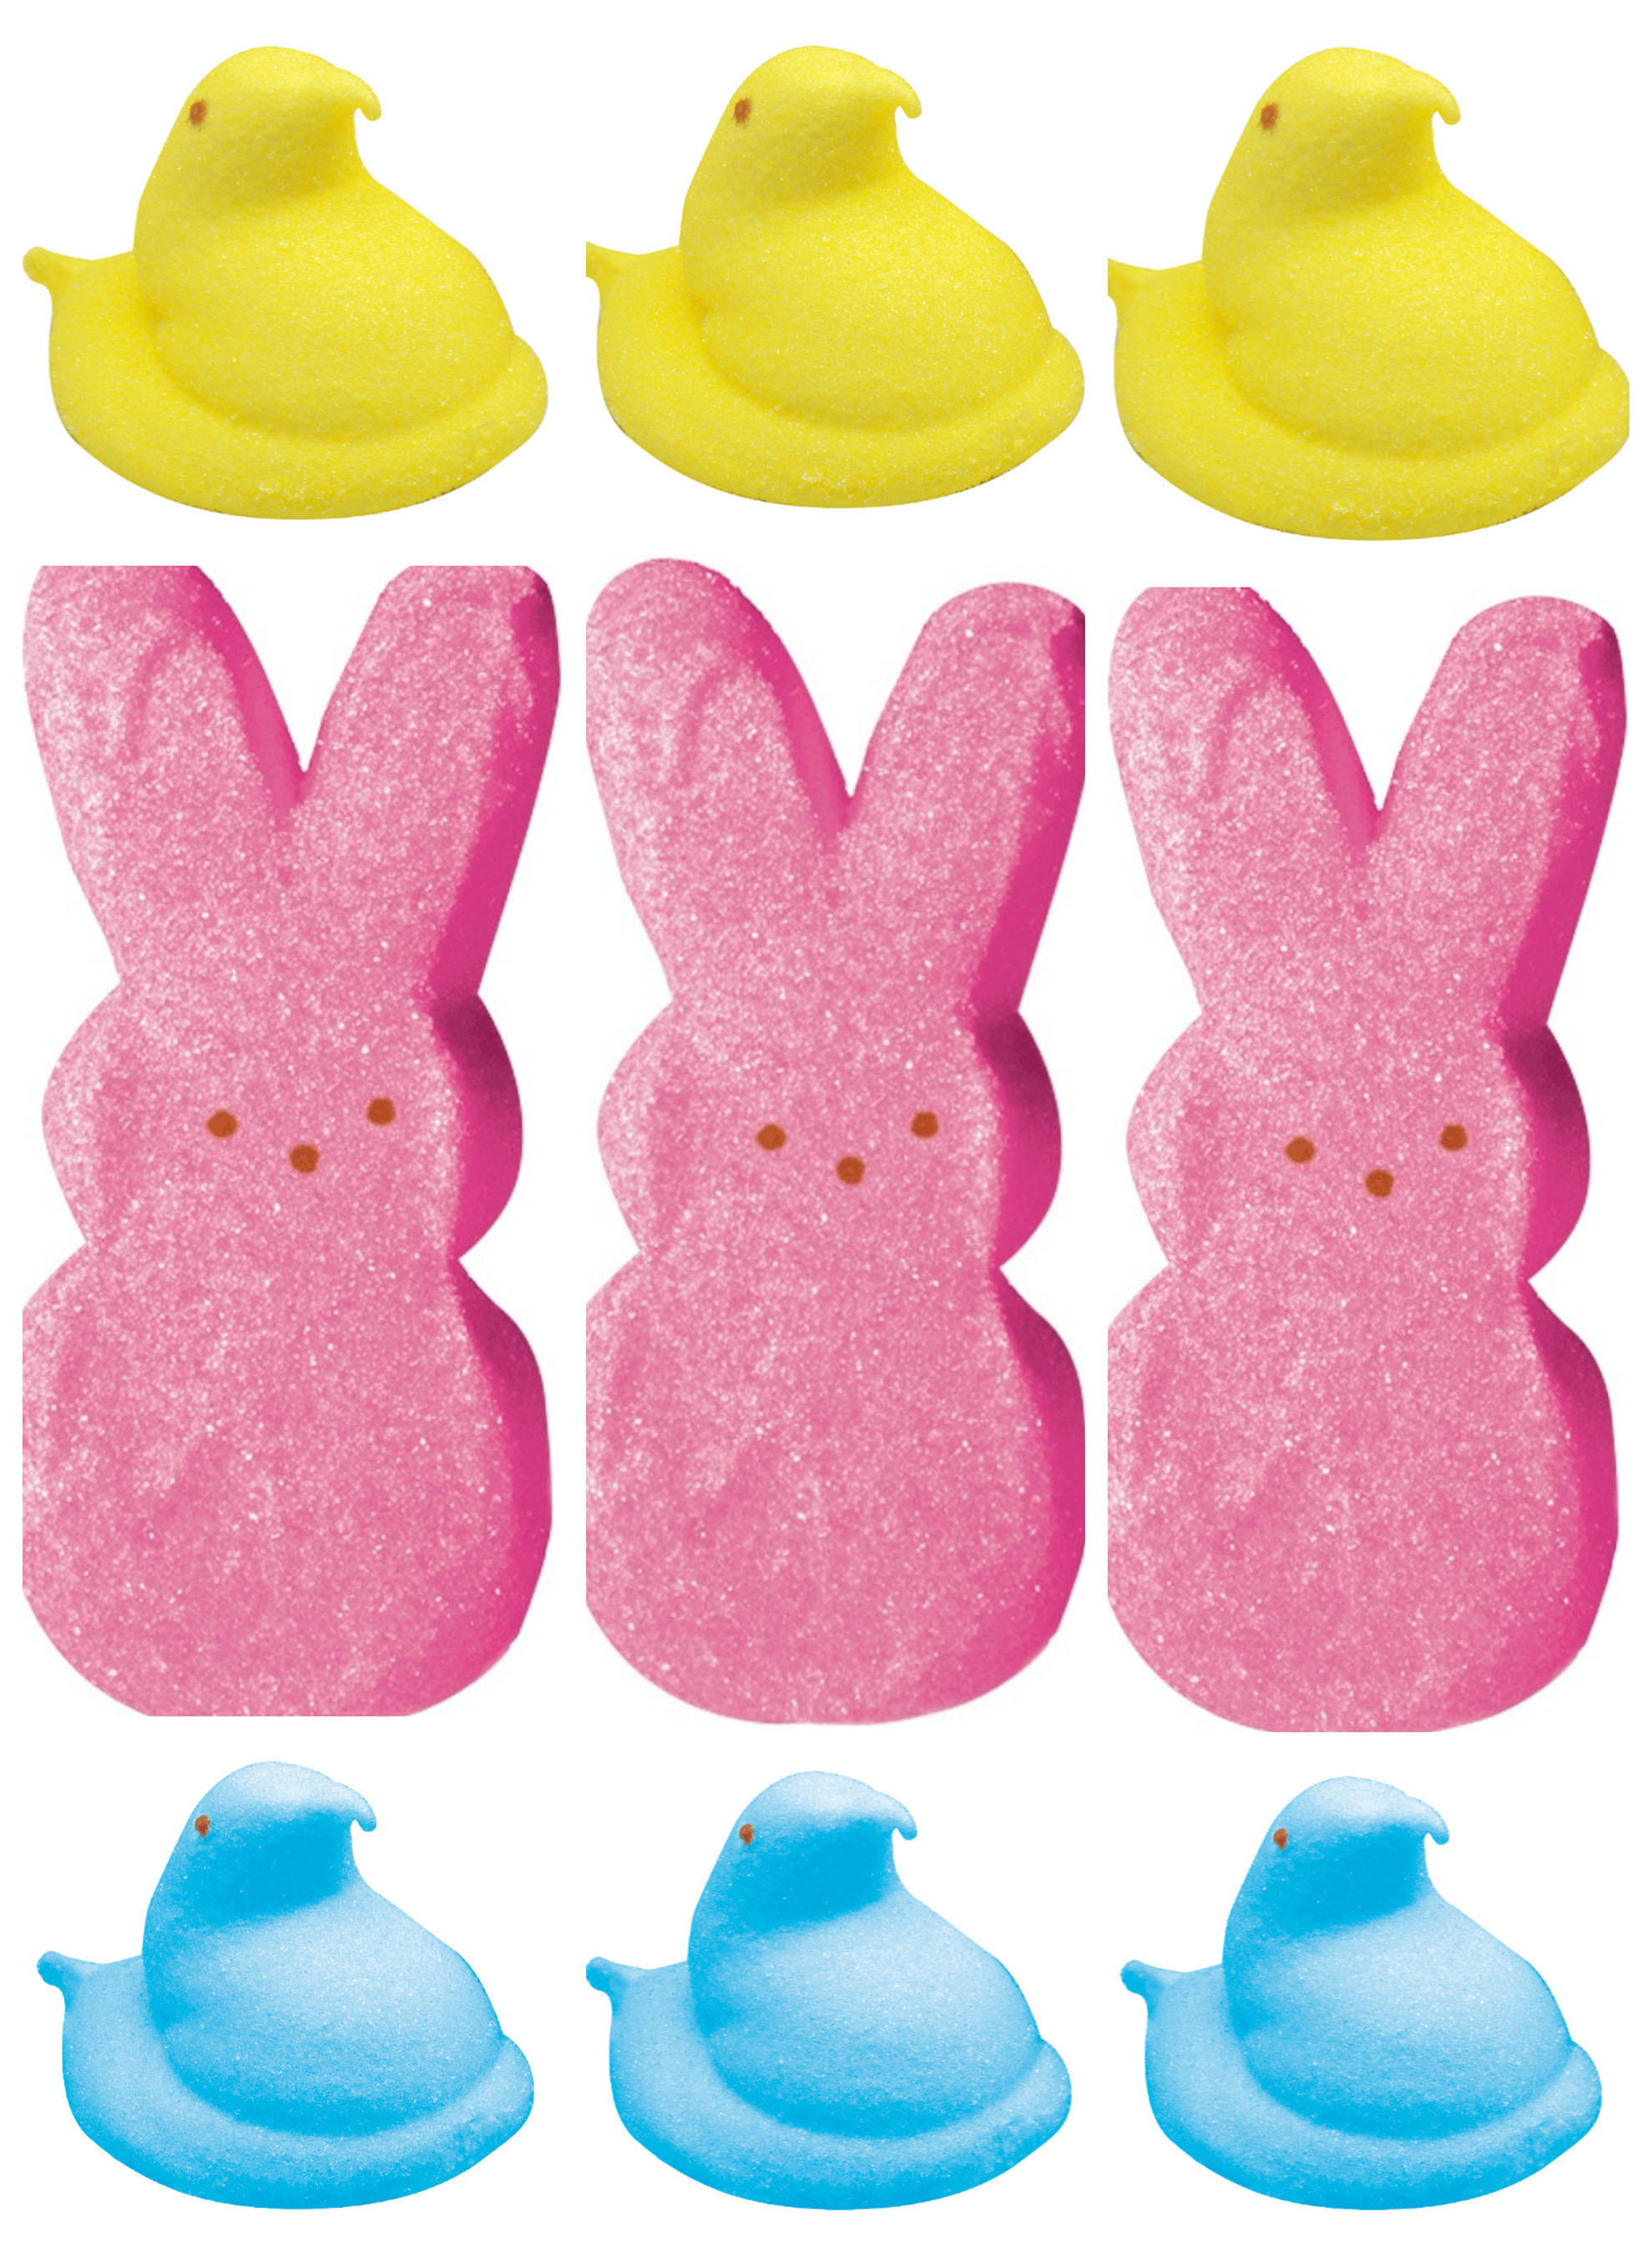 Consumers take online survey to determine most popular PEEPS. (PRNewsFoto/PEEPS) (PRNewsFoto/PEEPS)